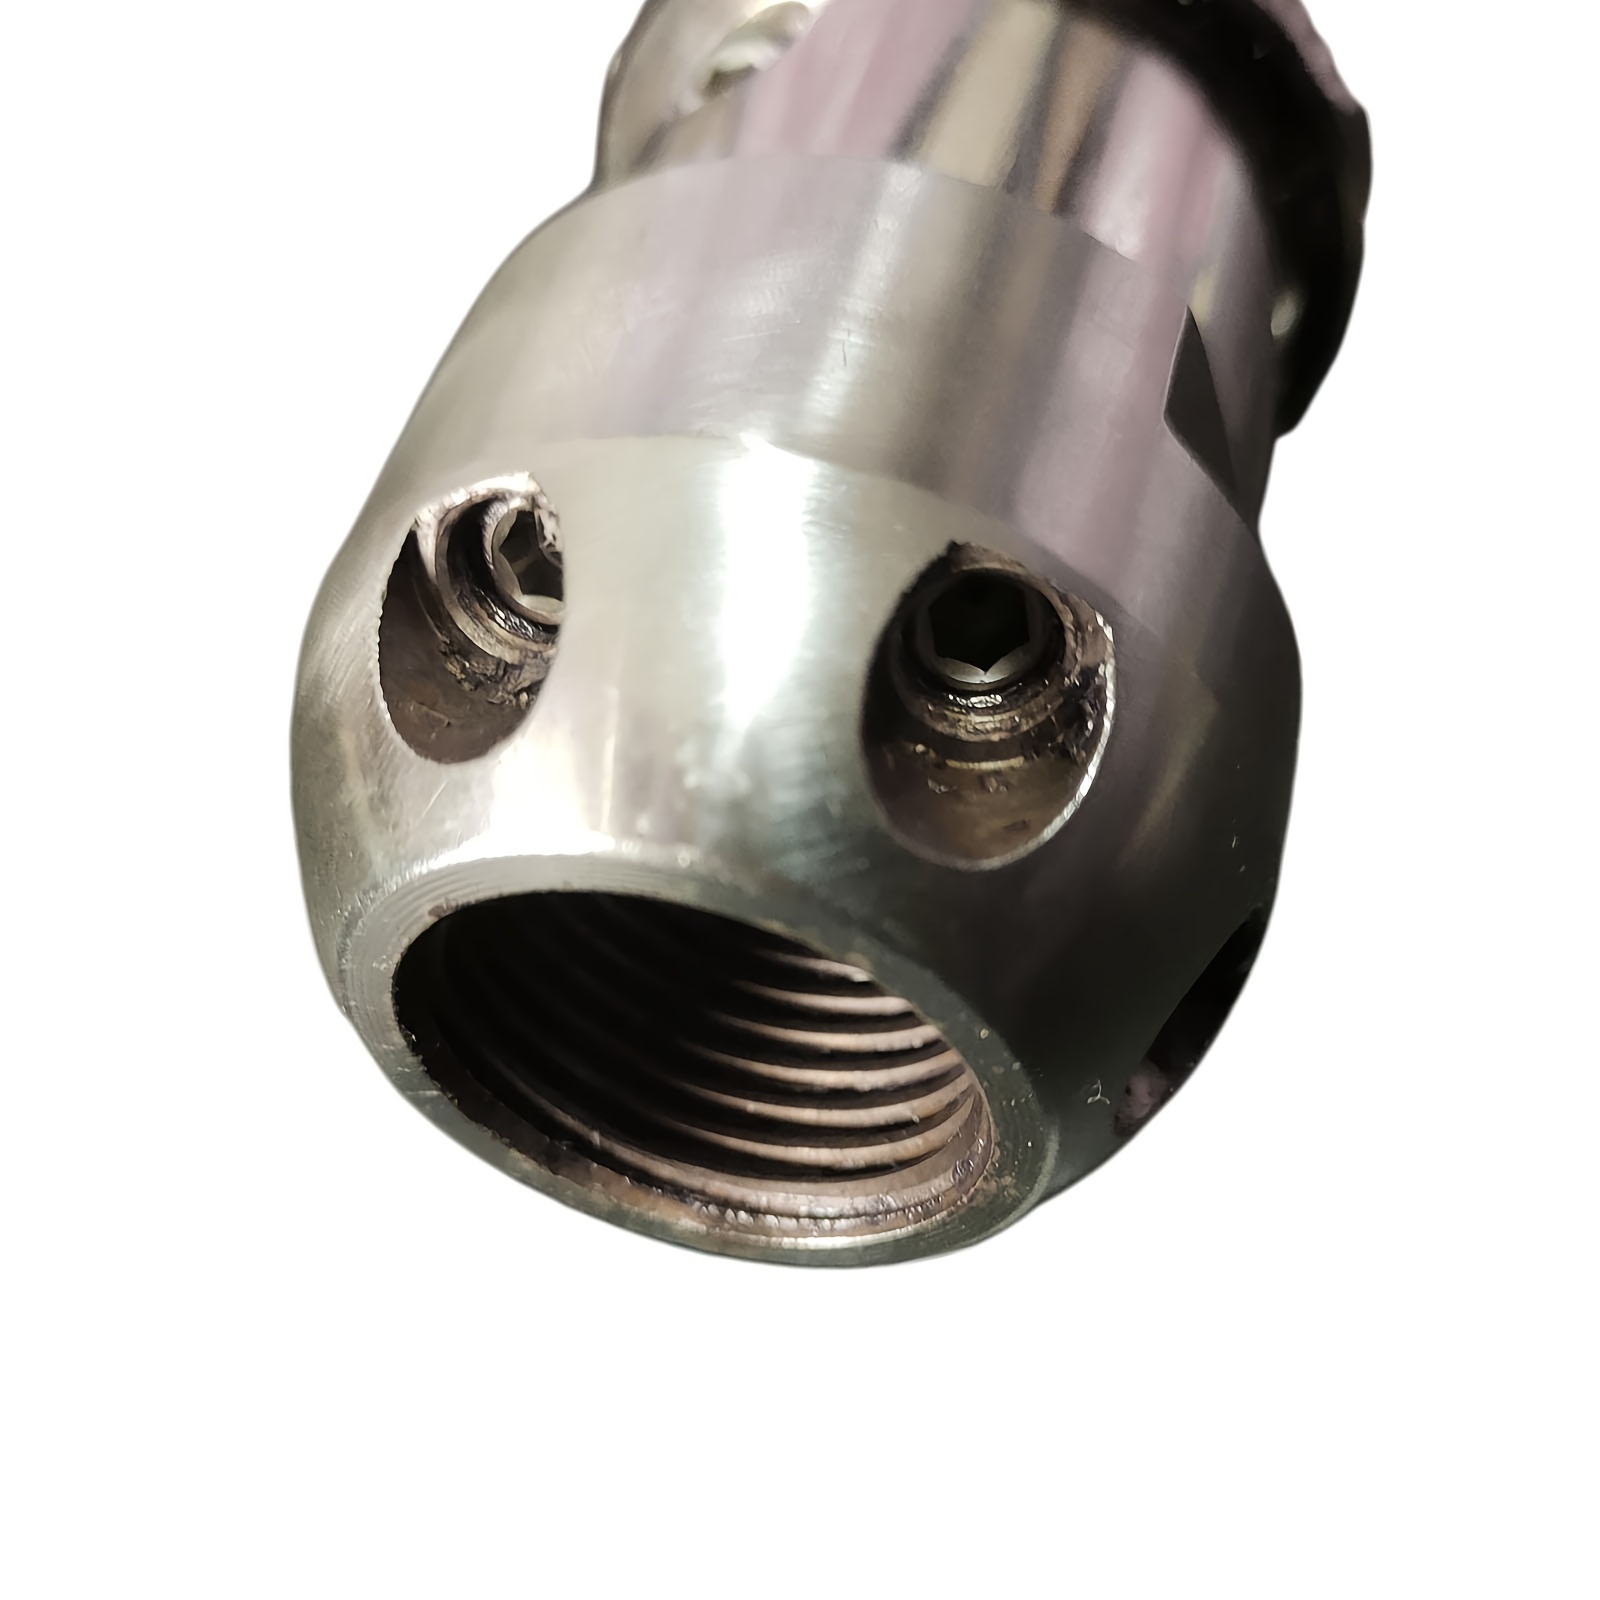 Industrial Grade Pipe Unclogger High Pressure Washer Adapter - Temu